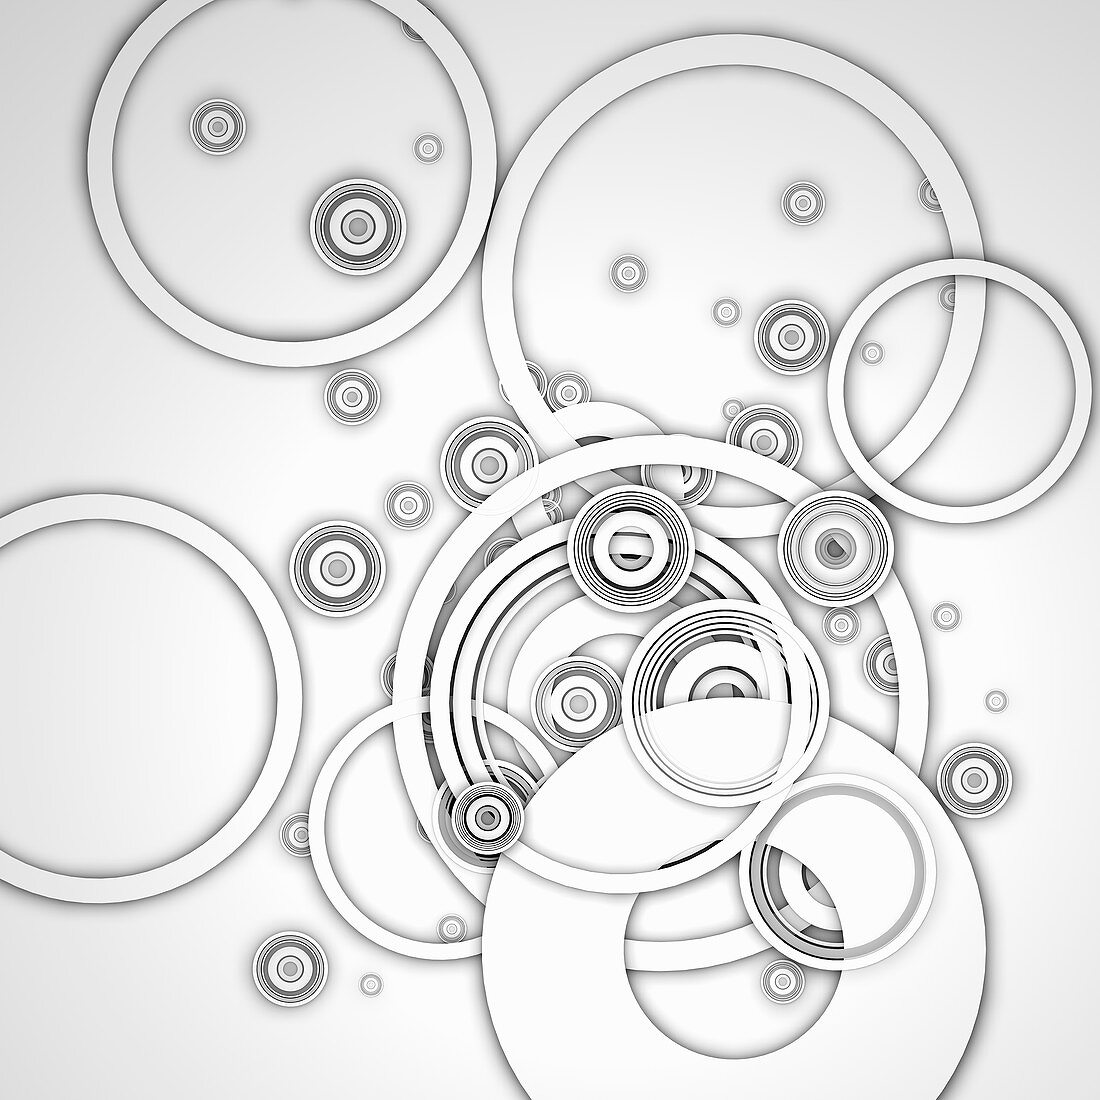 Overlapping concentric circle pattern, illustration